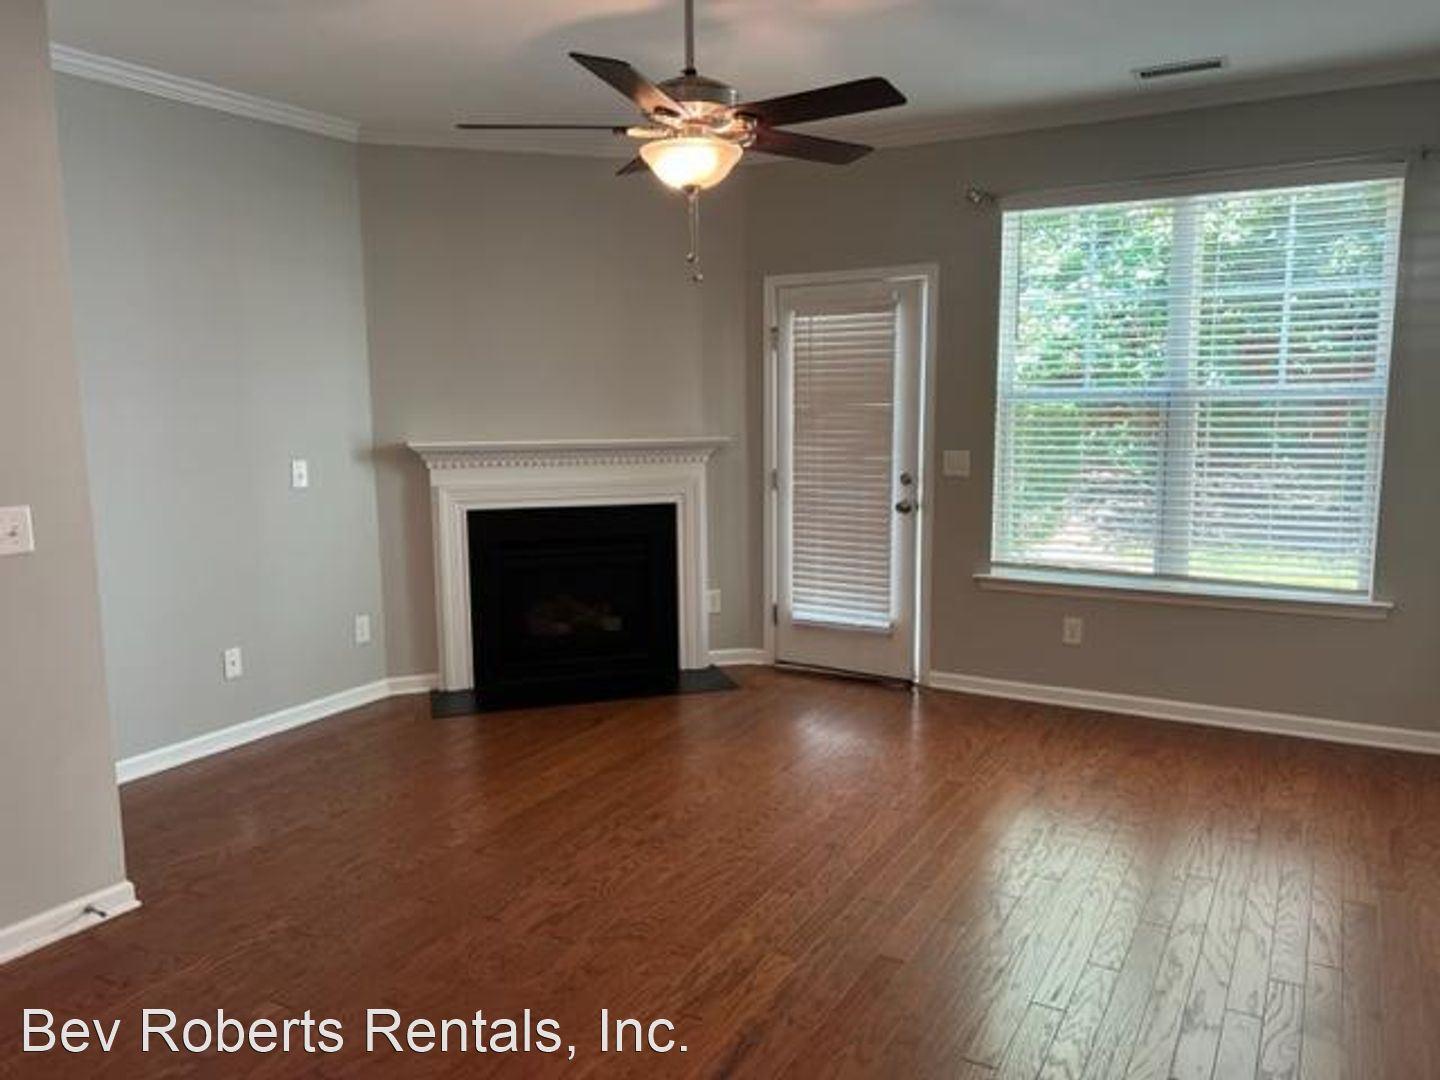 Photo 10 of 28 of 3022 Berkeley Springs Place (UnitID 12375674) townhome